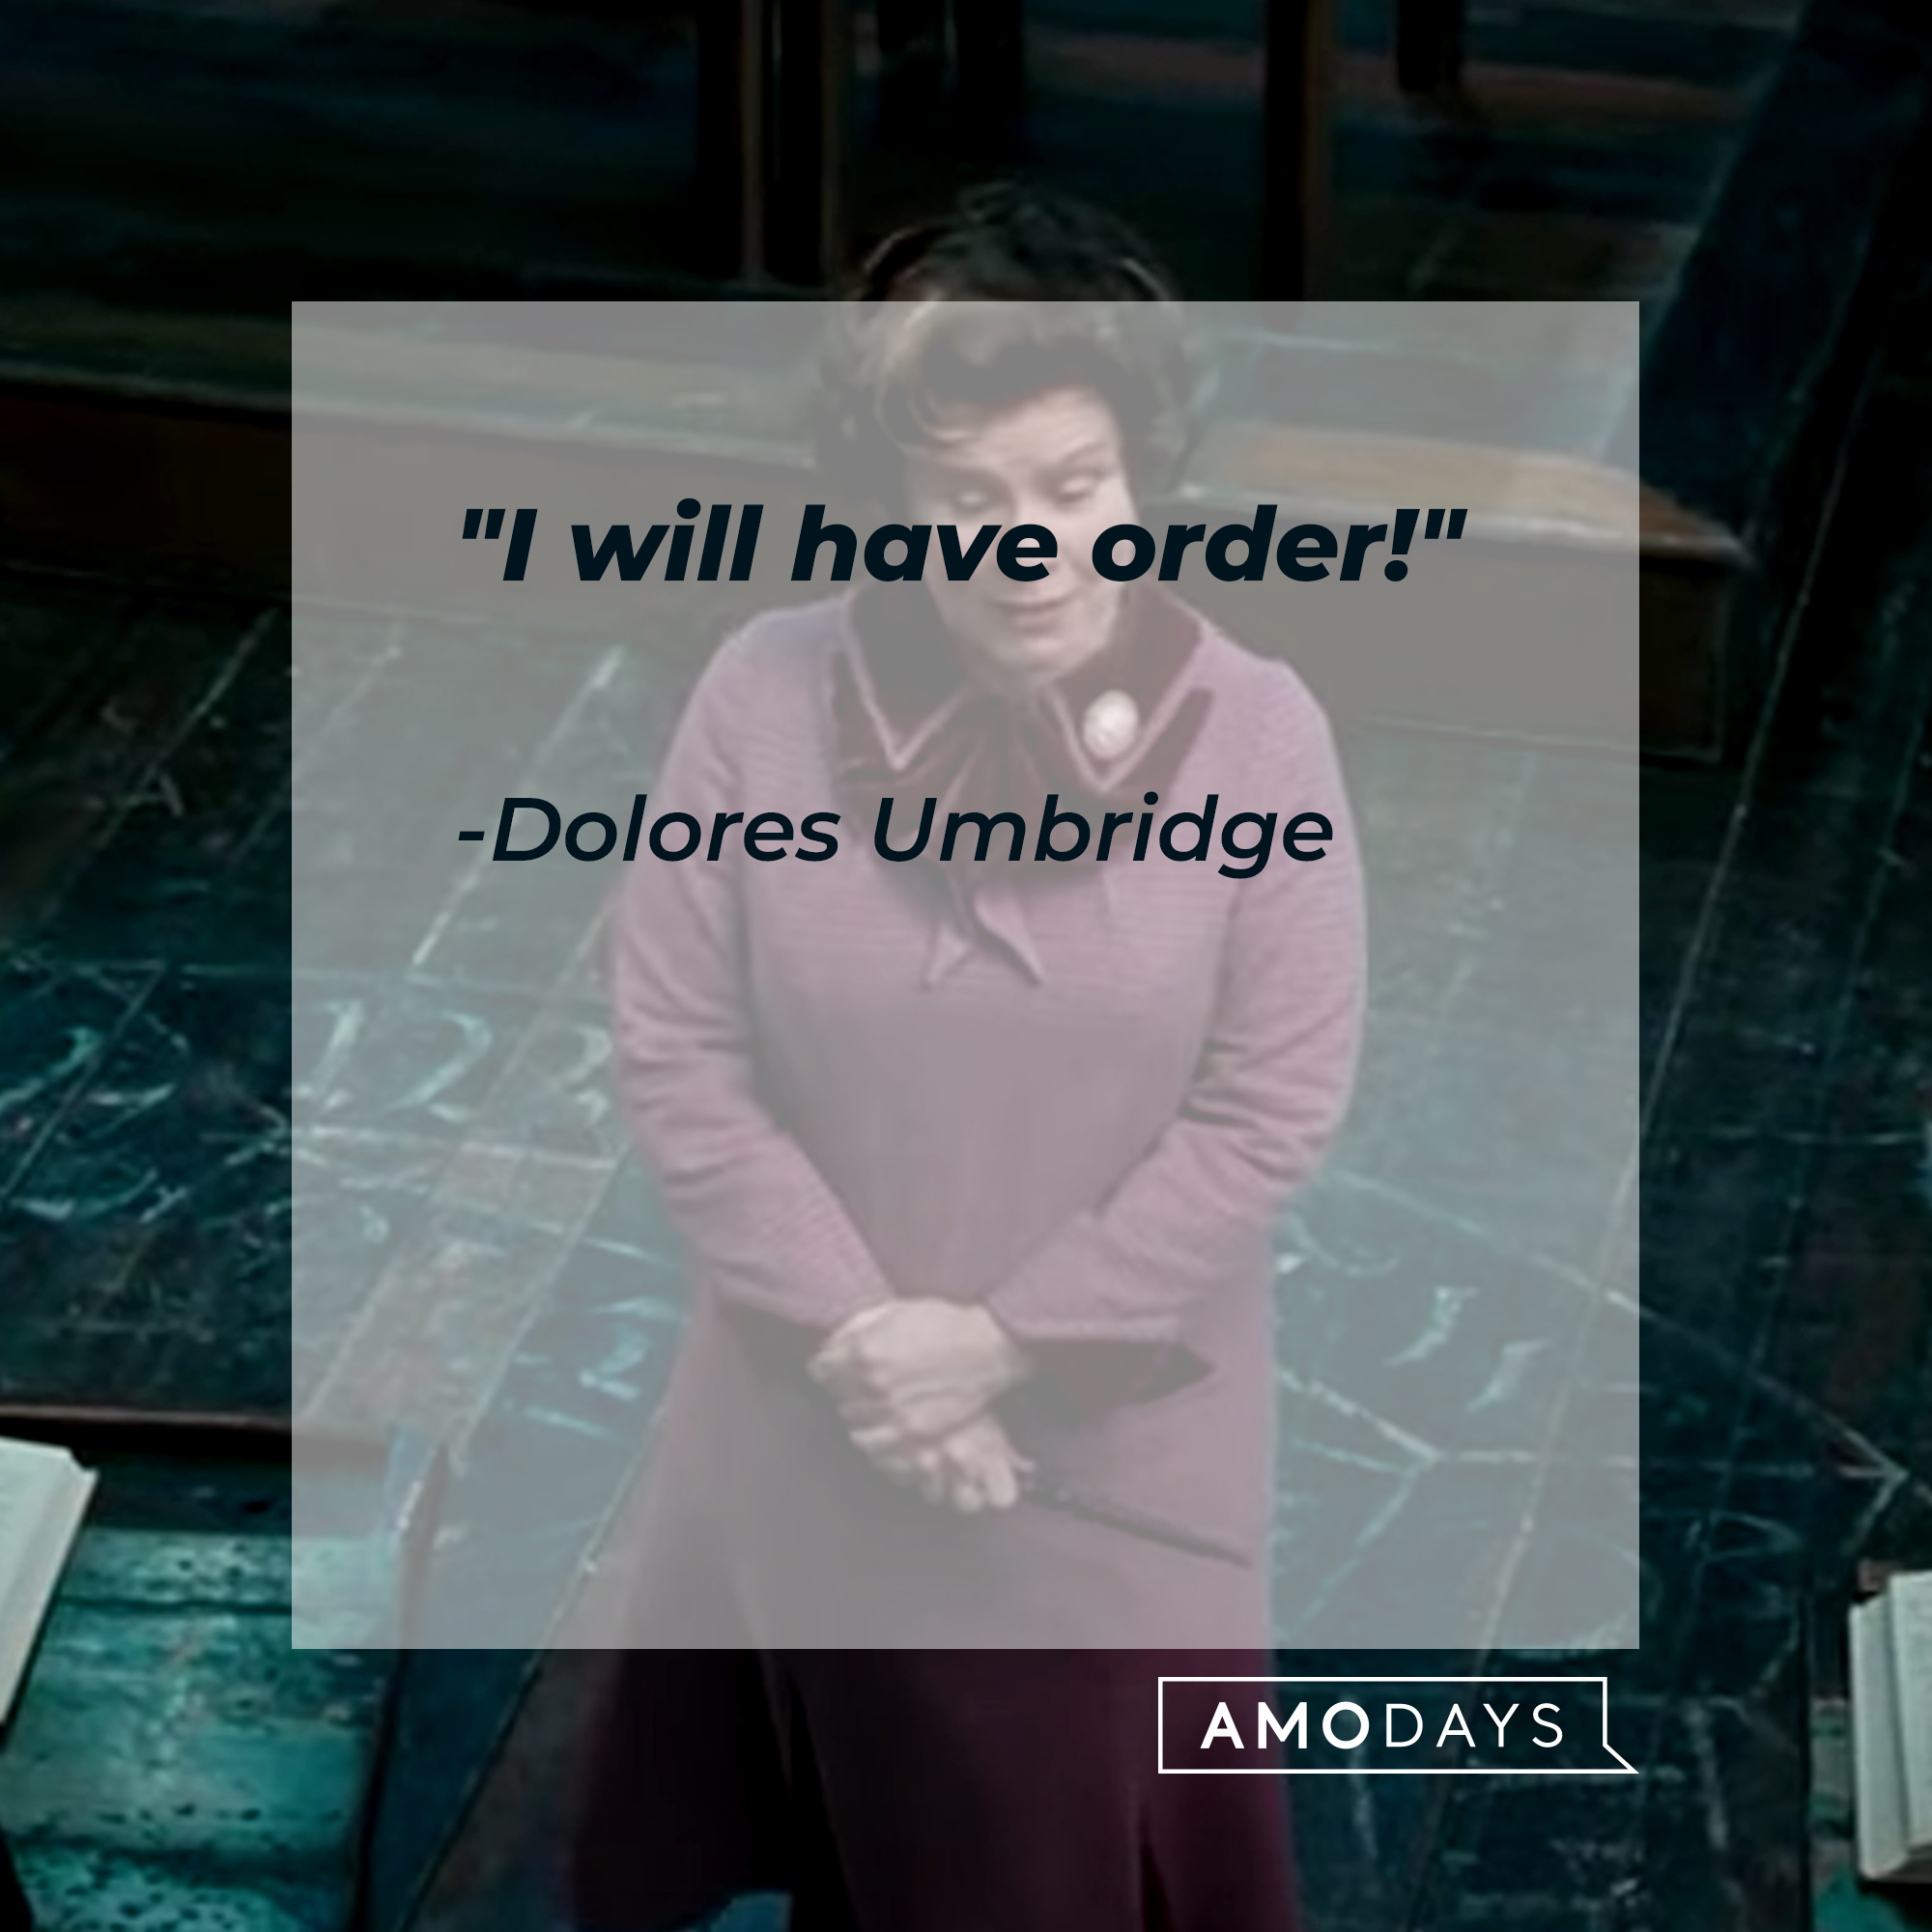 A photo of Dolores Umbridge with the quote, "I will have order!" | Source: Facebook/harrypotter